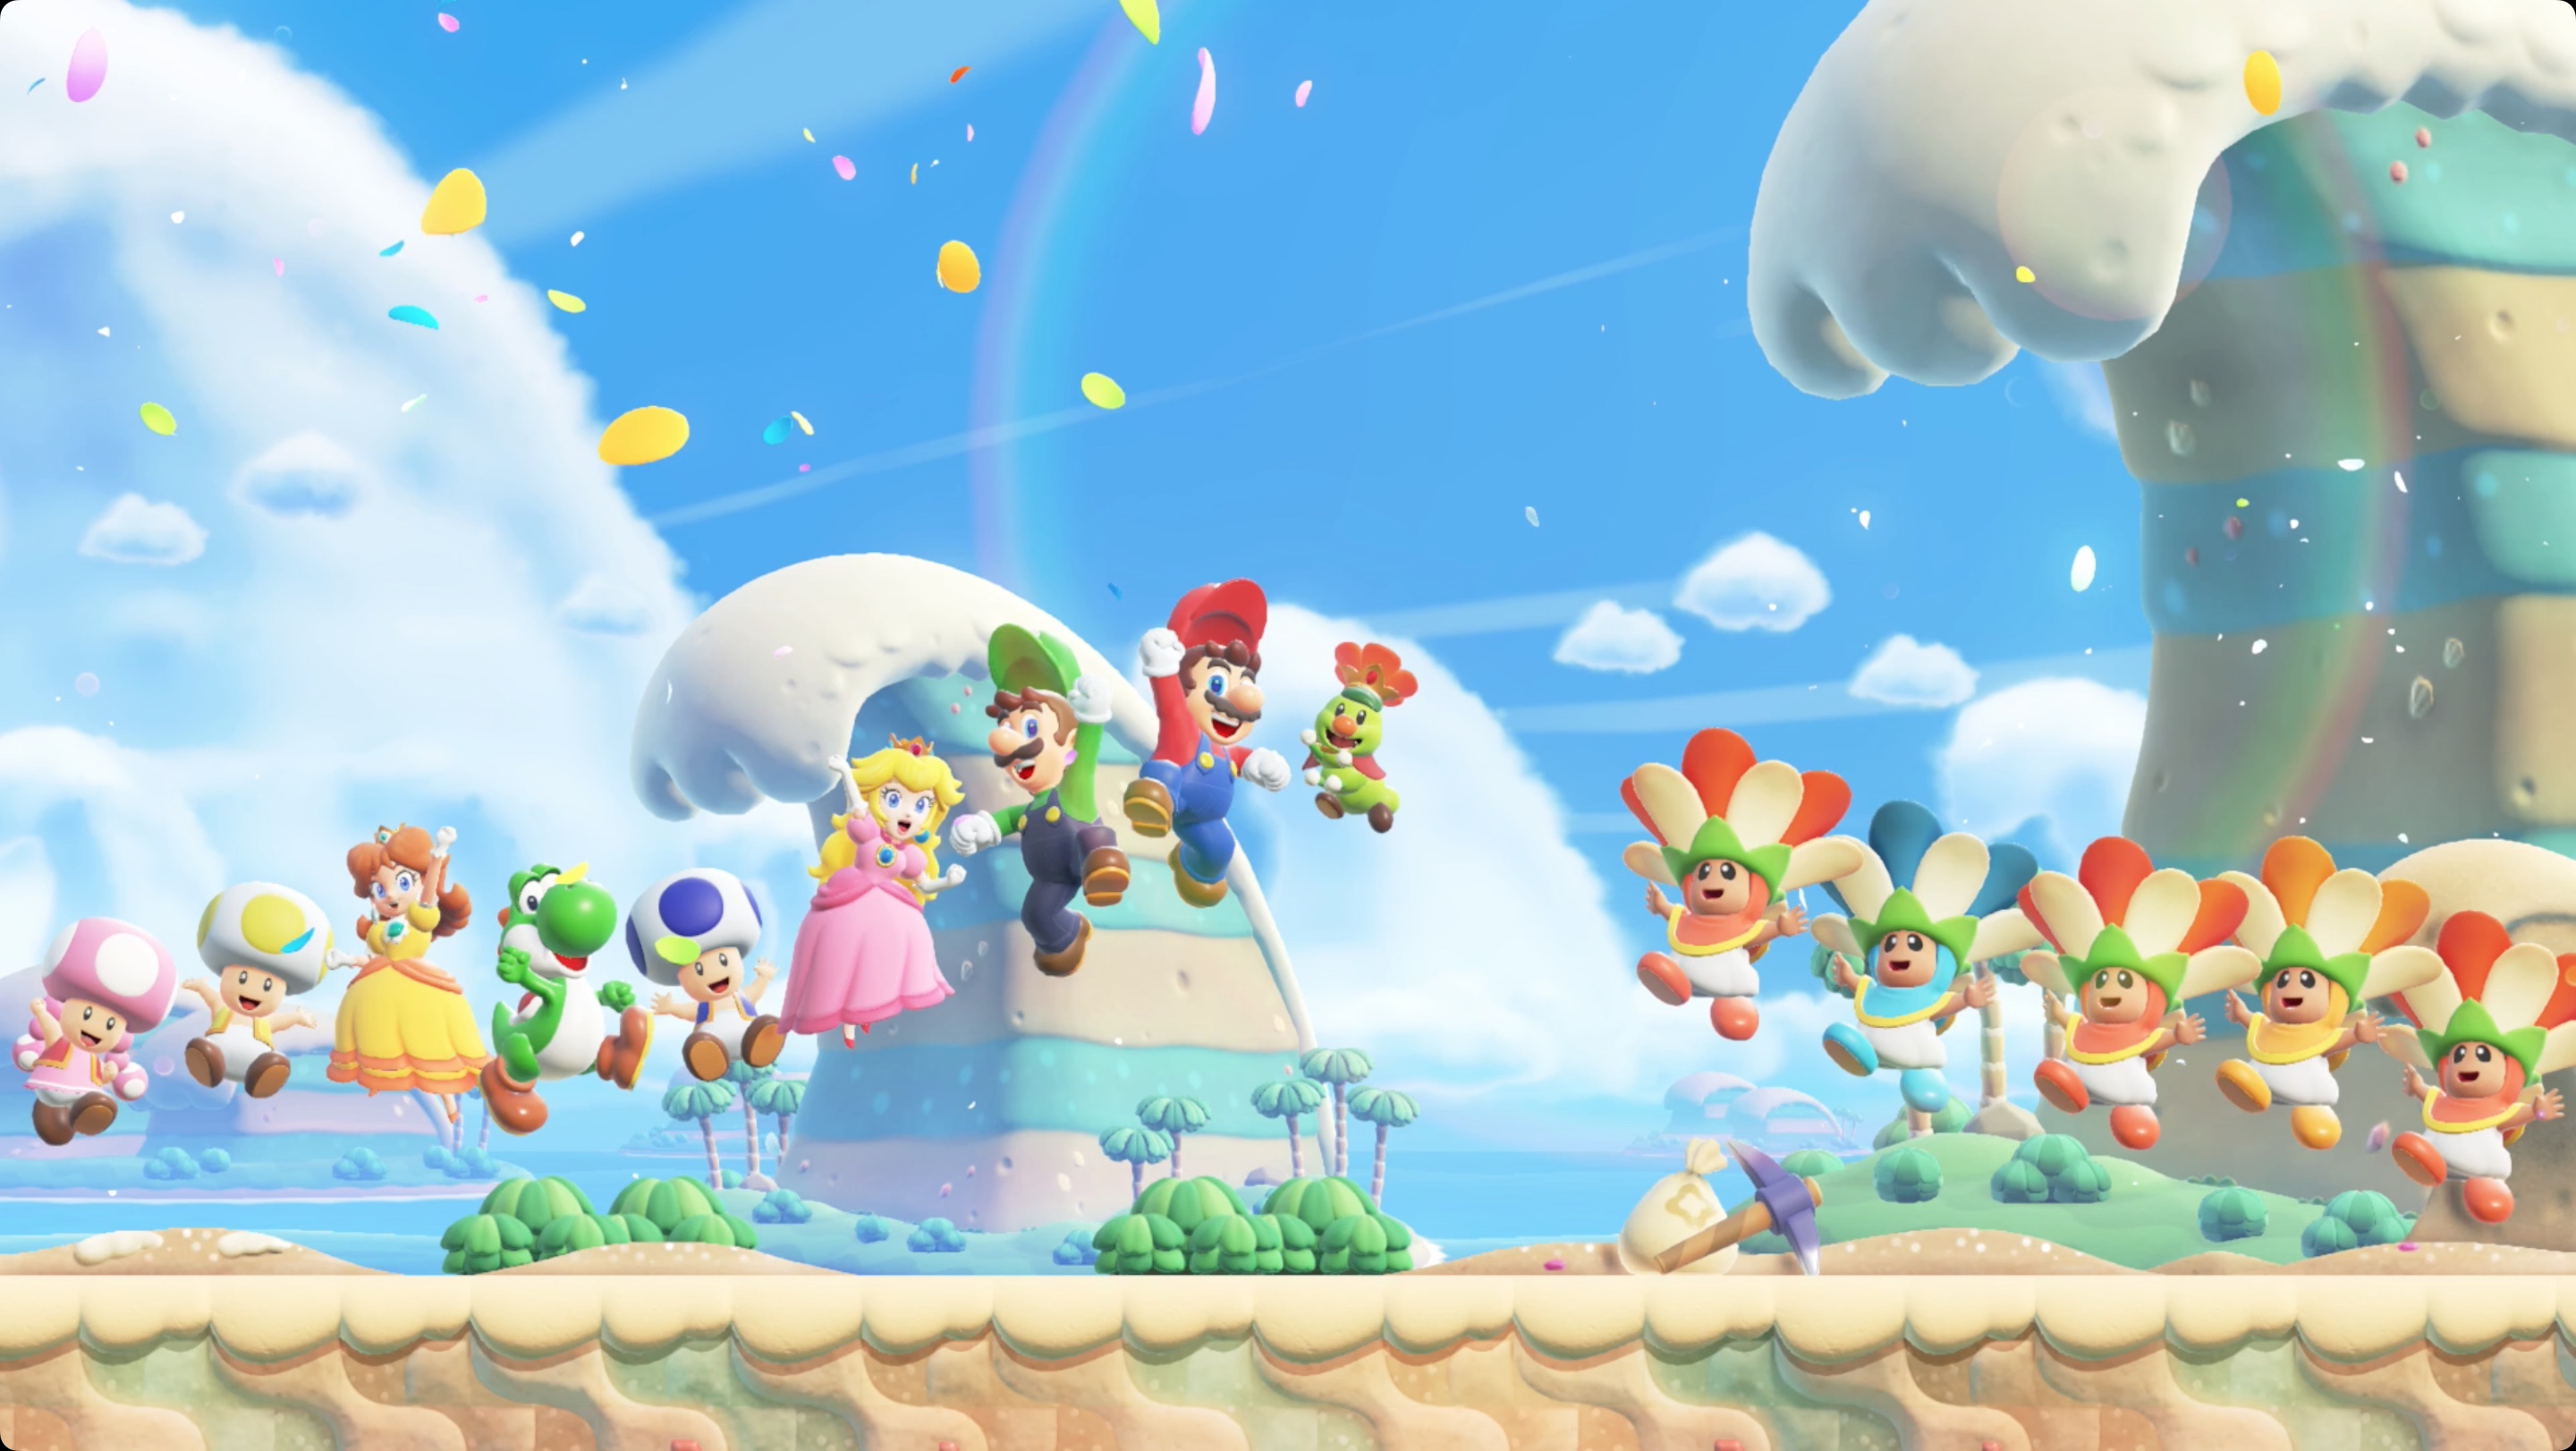 Super Mario Bros. Wonder end screen of all characters celebrating